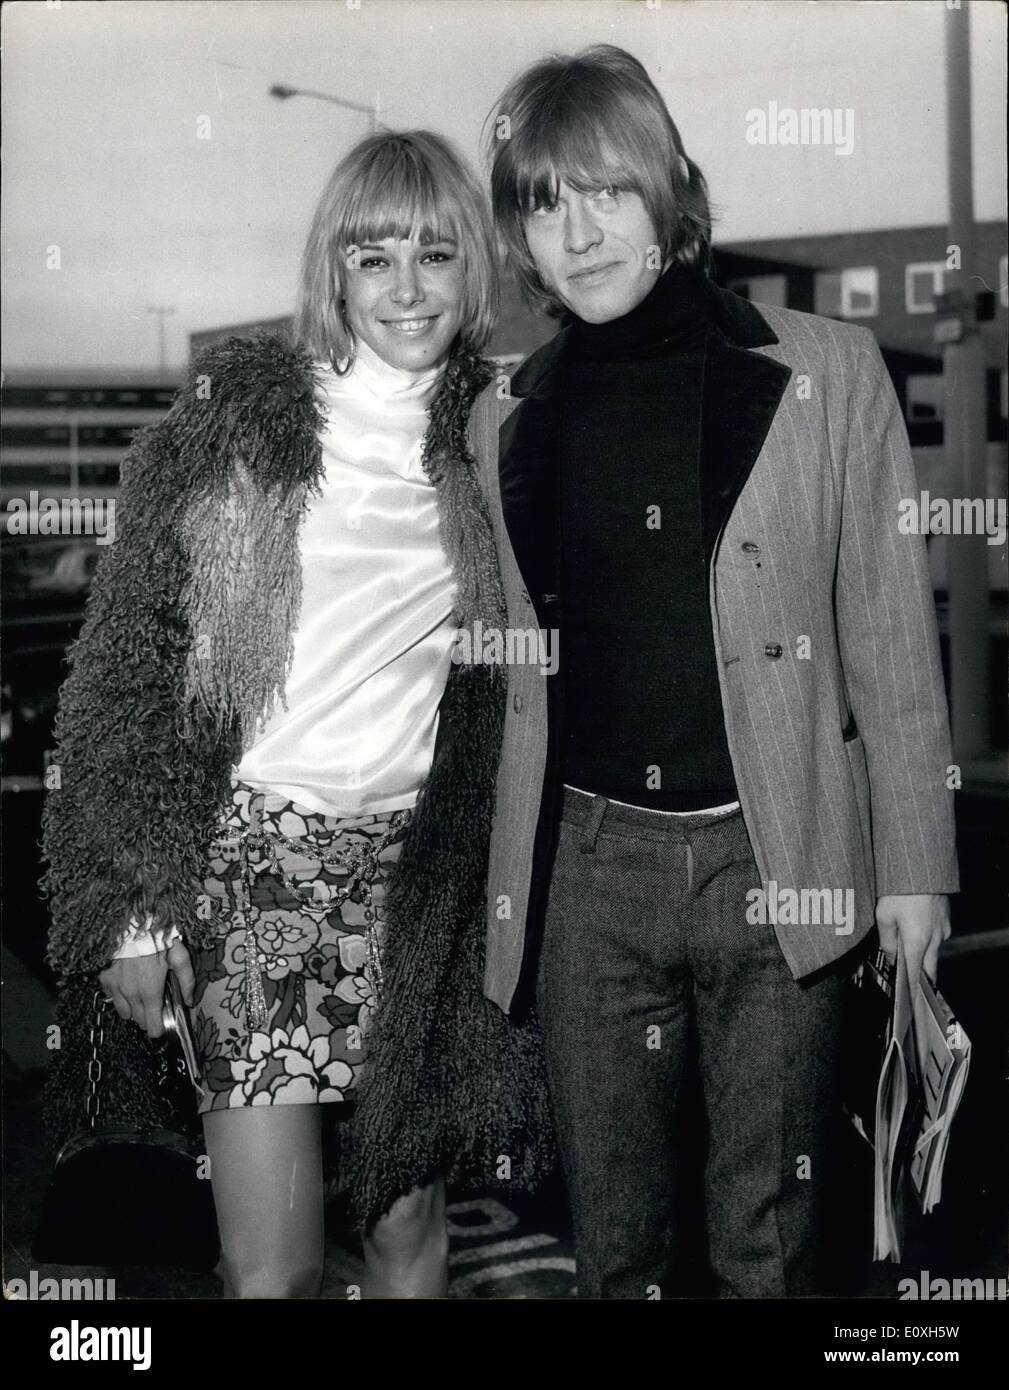 Dec. 12, 1966 - German Actress Arrives by air after Rumours that she is to Marry Brian Jones of Rolling Stones.: Blonde German actress Anita Pallenberg, age 19, flew into London today following romours that she is about to marry the Rolling Stones guitarist, Brian Jones. She was met on arrival at London Airport today by Brian. Photo shows German actress Anita Pallenberg pictured with Brian Jones when she flew into London Airport from Munich today. Stock Photo